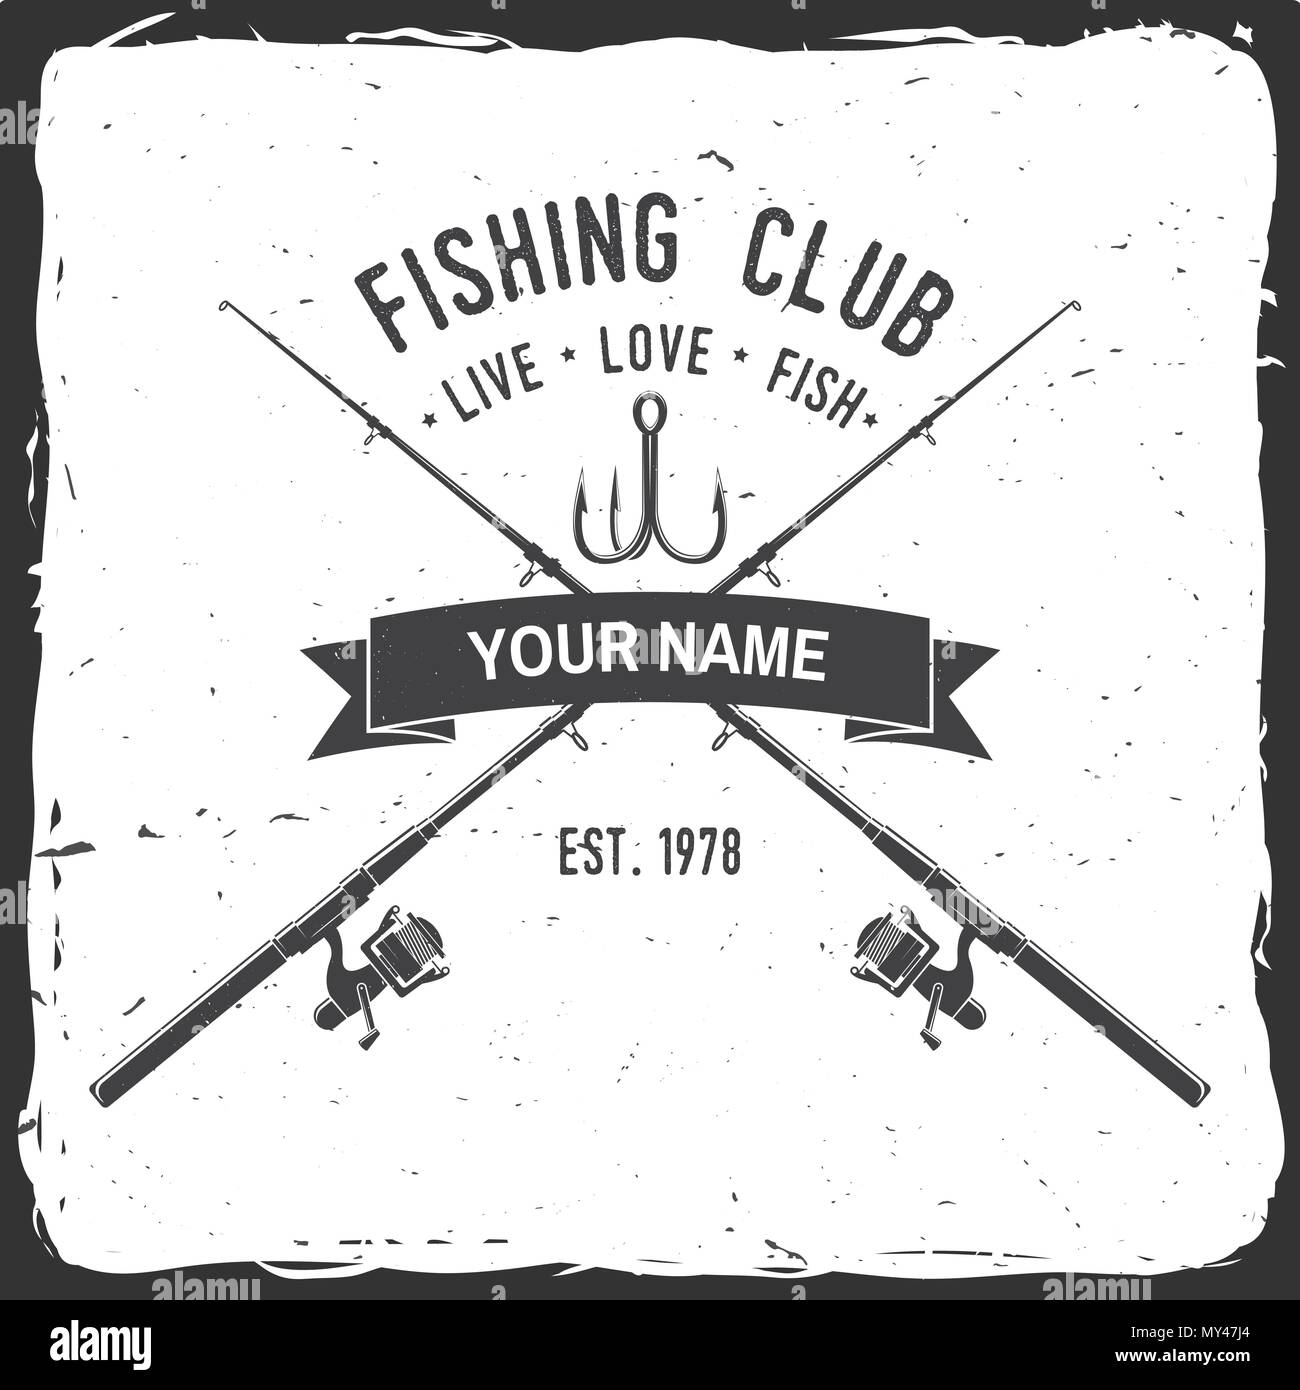 Download Fishing club. Vector illustration. Concept for shirt or ...